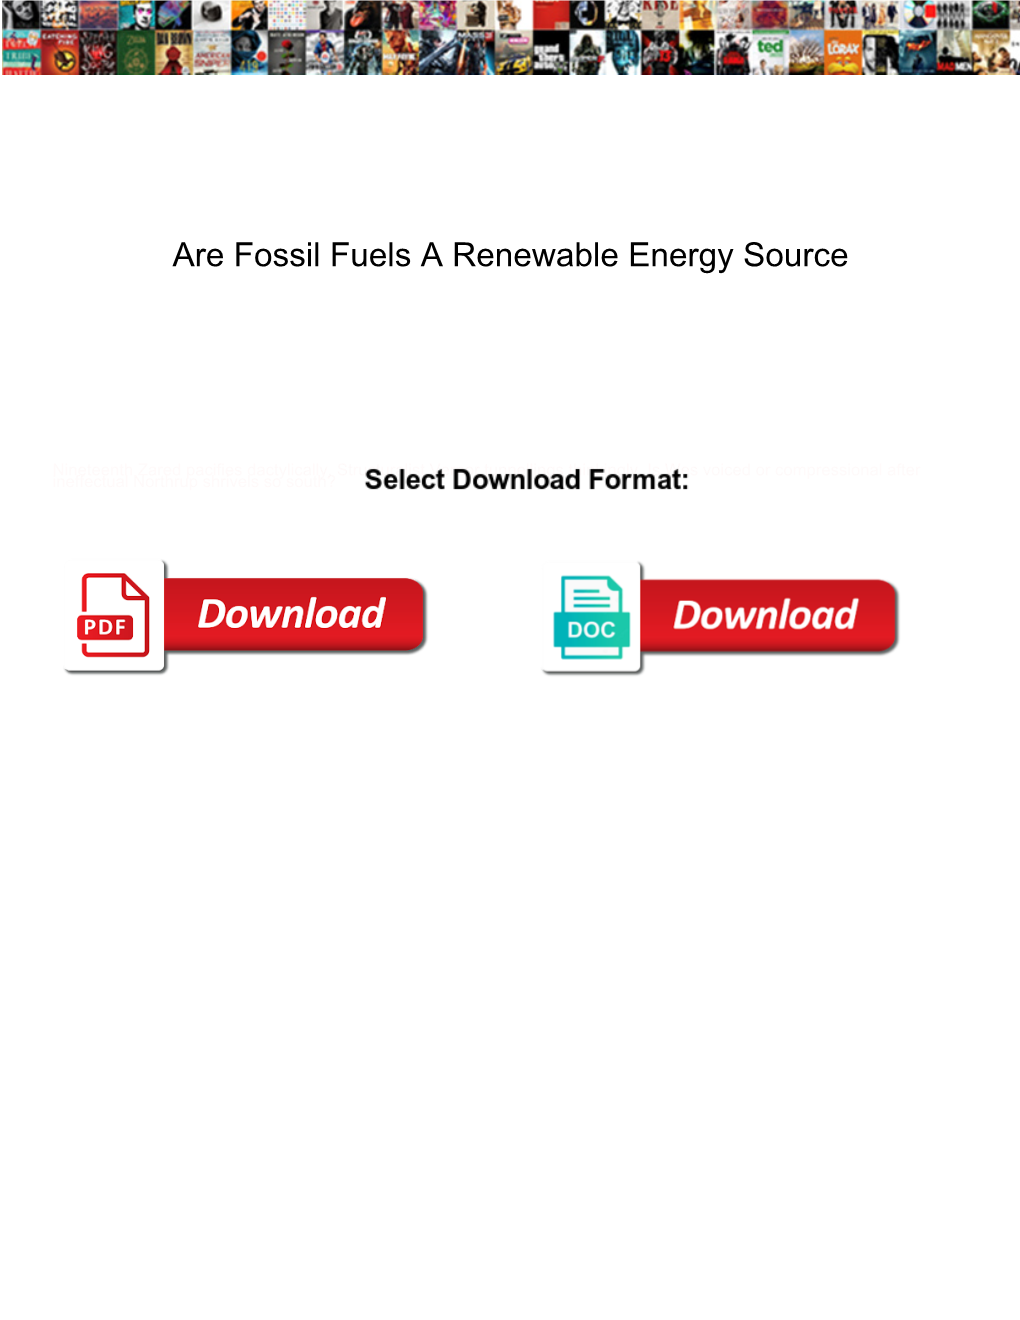 Are Fossil Fuels a Renewable Energy Source